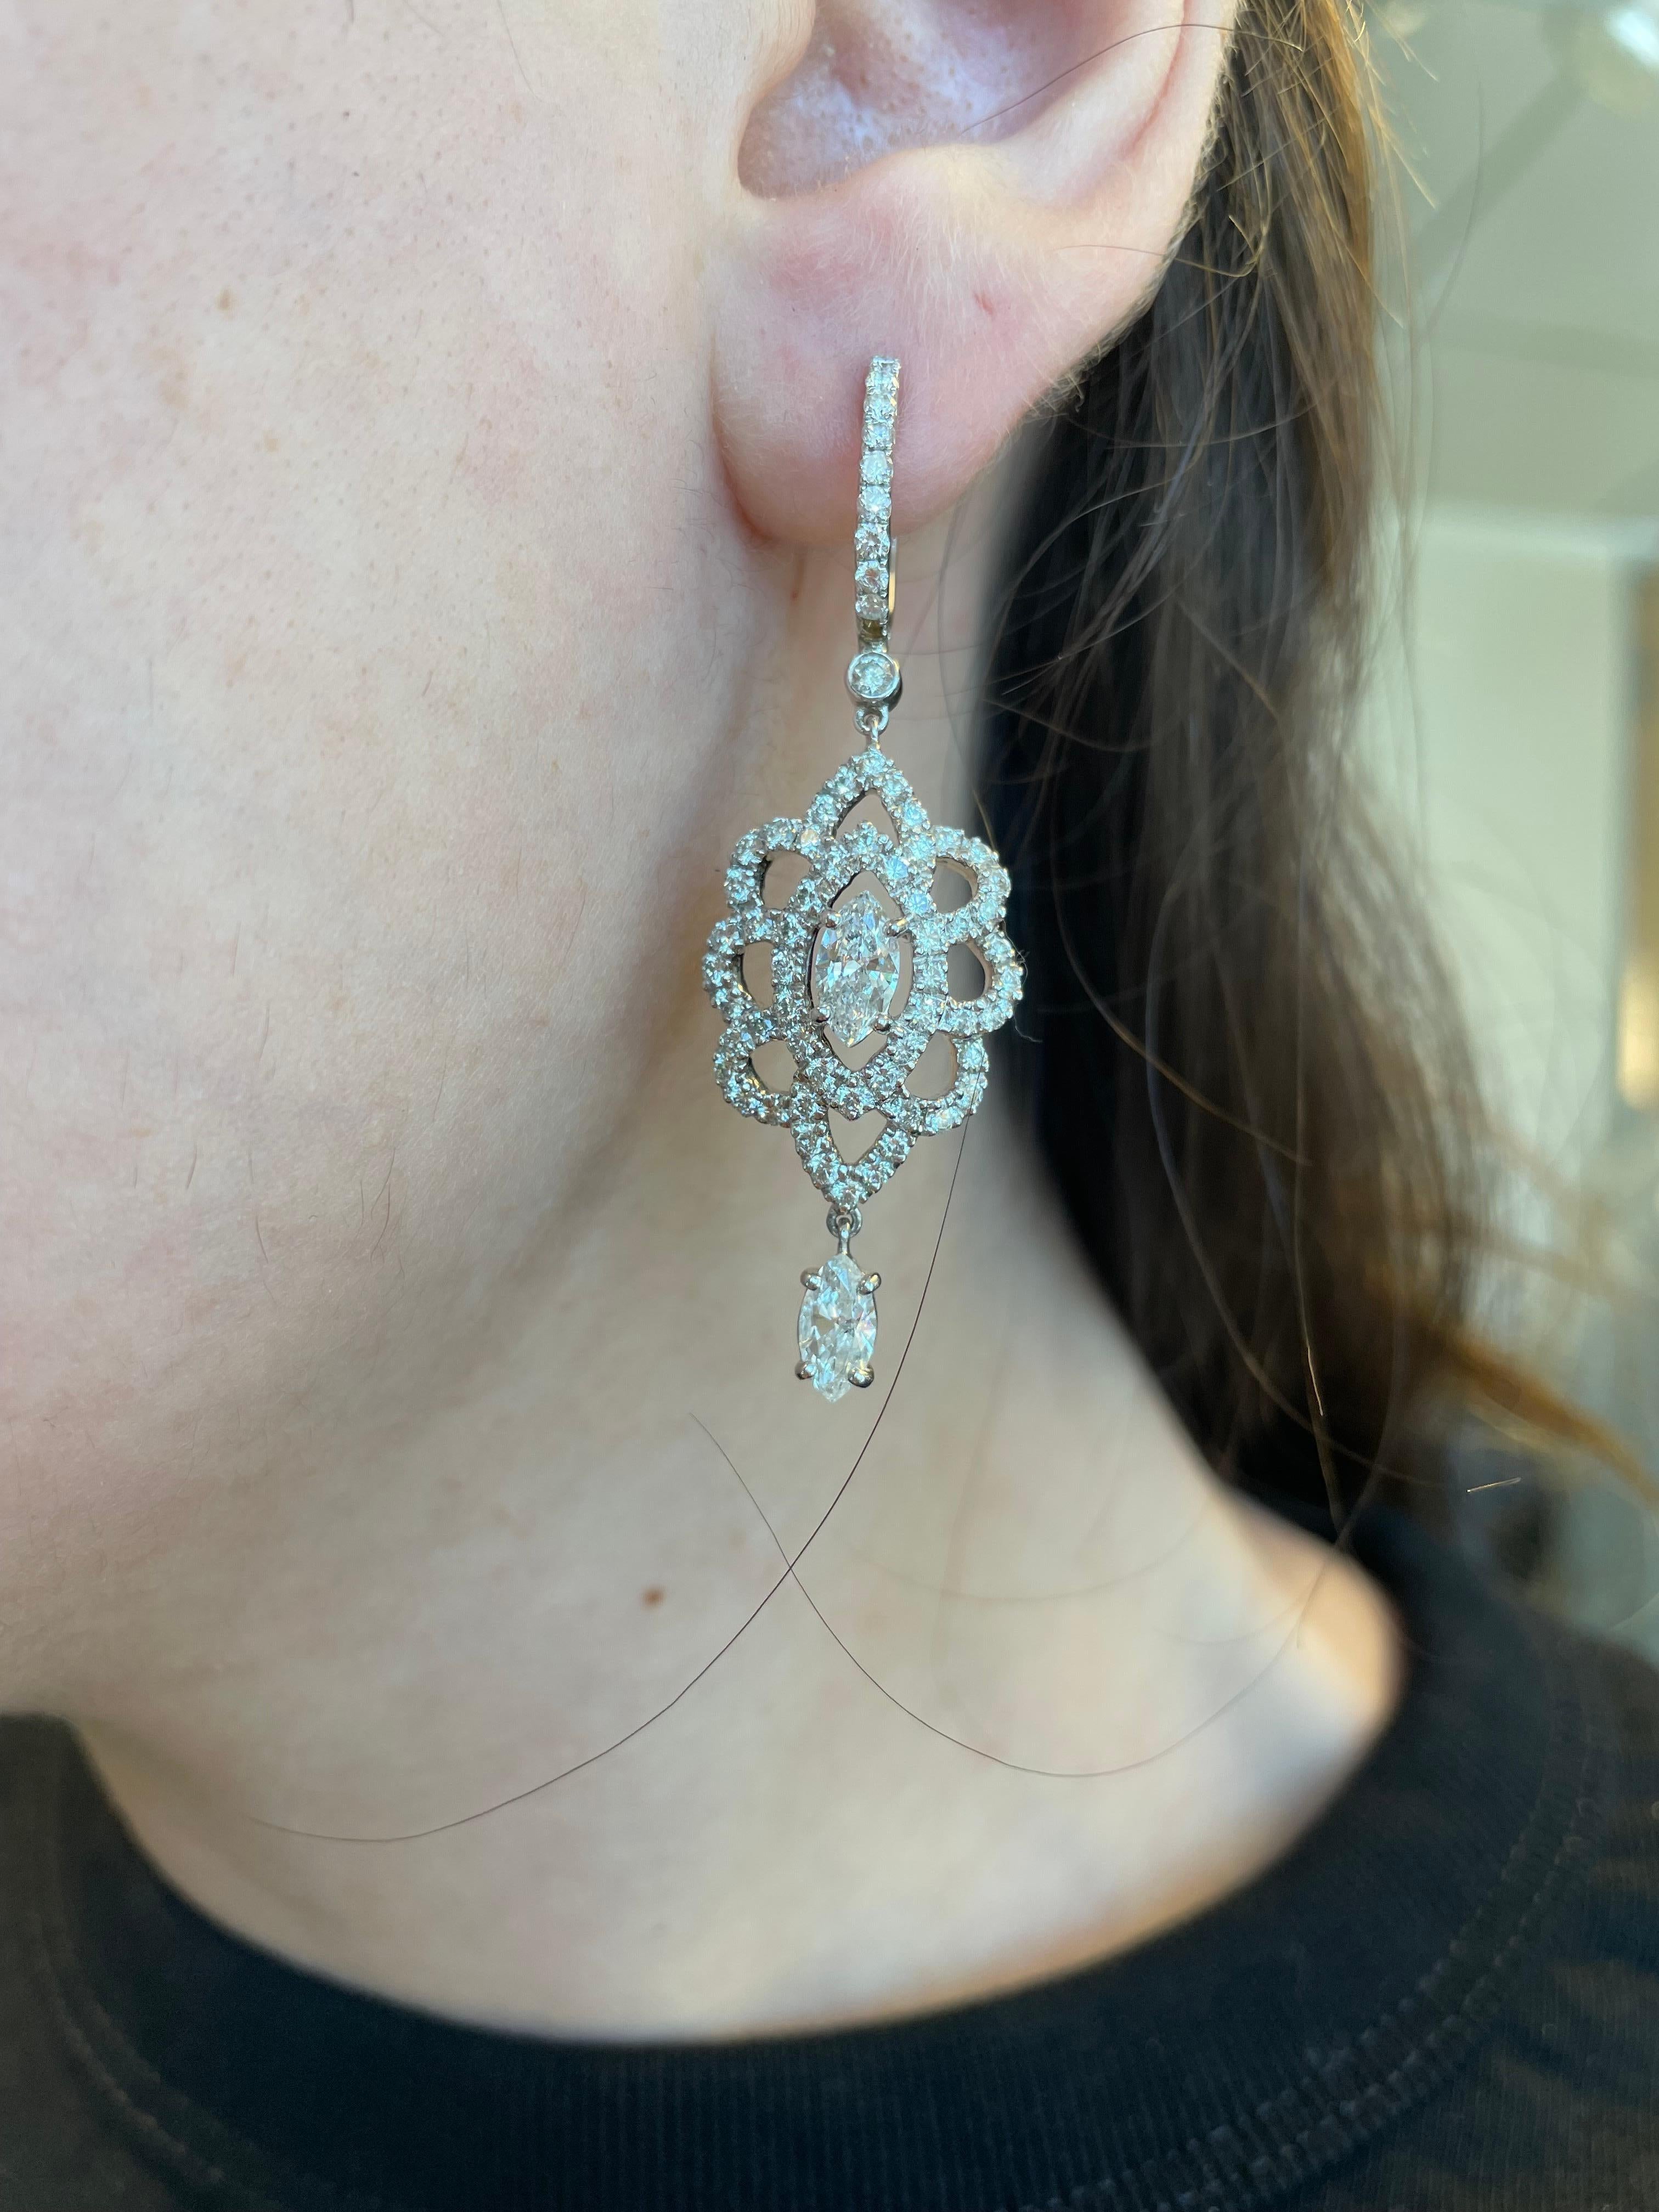 Stunning rose cut diamond chandelier statement earrings.
4 marques cut diamonds, 2.03 carats. Approximately H/I color and SI clarity. 128 round brilliant diamonds, 2.60 carats. Approximately H/I color and SI clarity. 18-karat white gold.
4.63 carats